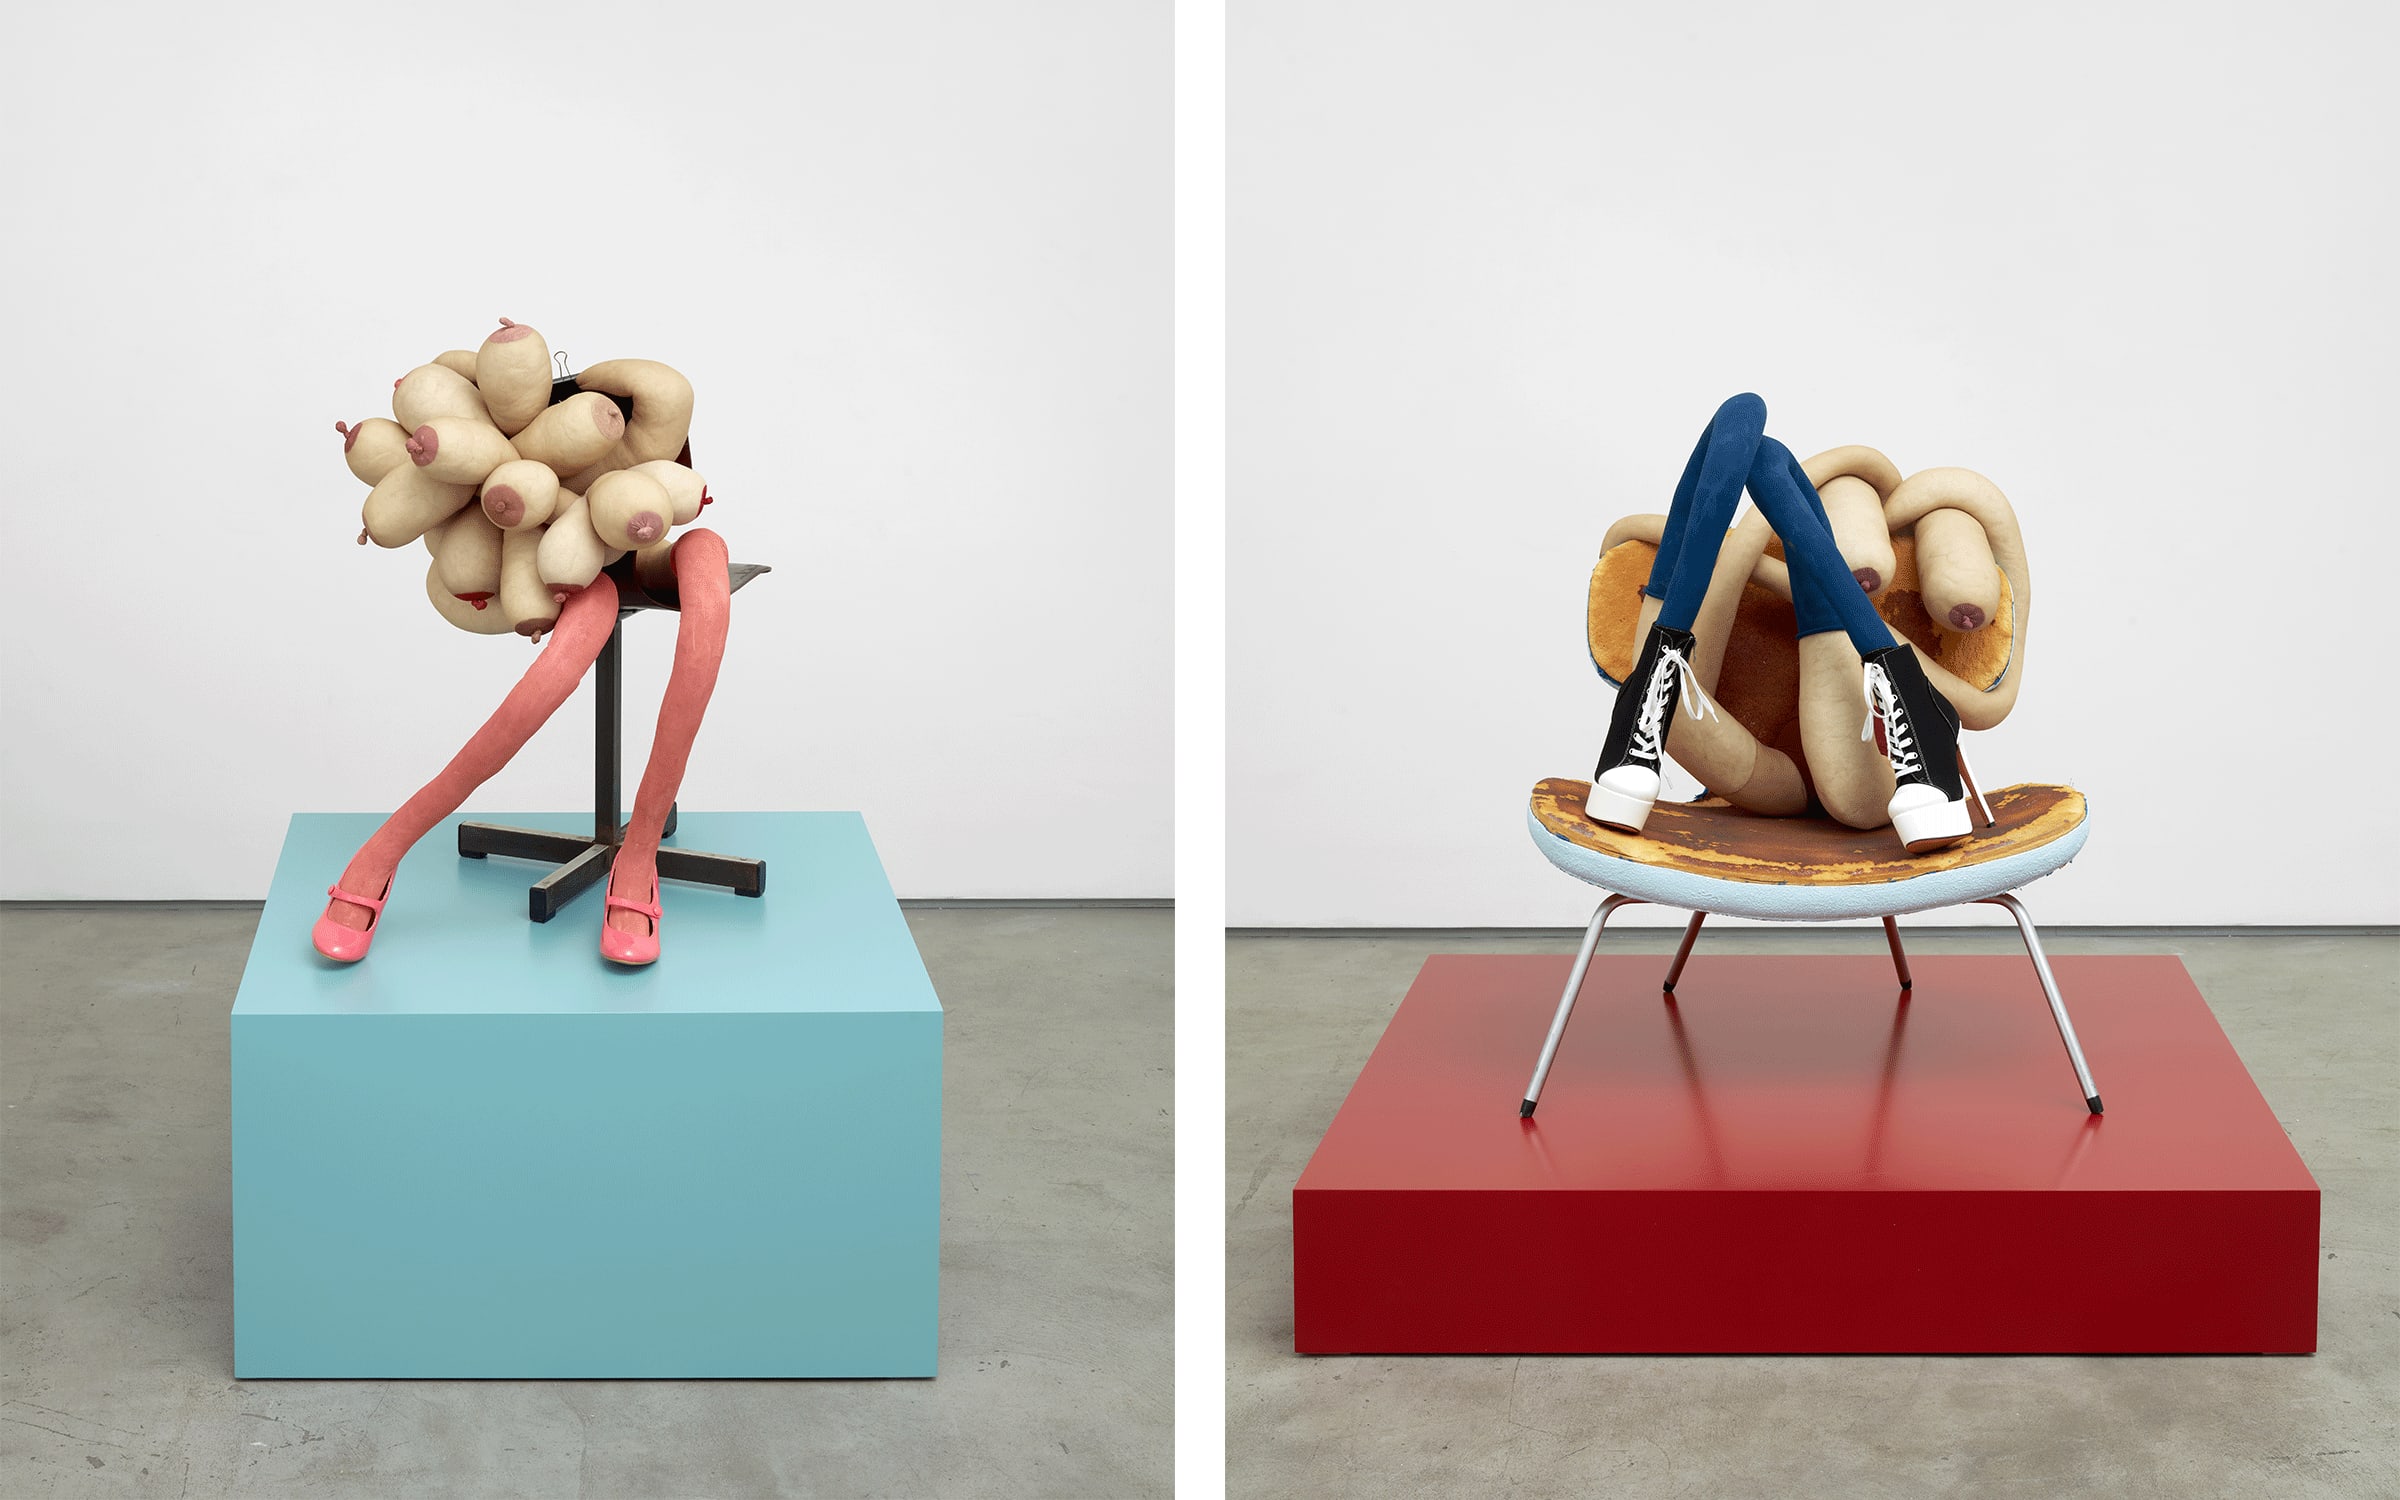 Artworks by Sarah Lucas. Courtesy of the artist and Sadie Coles HQ, London © Sarah Lucas. Left: SUGAR, 2020. Right: Sarah Lucas COOL CHICK BABY, 2020. Collection of Alexander V. Petalas. 